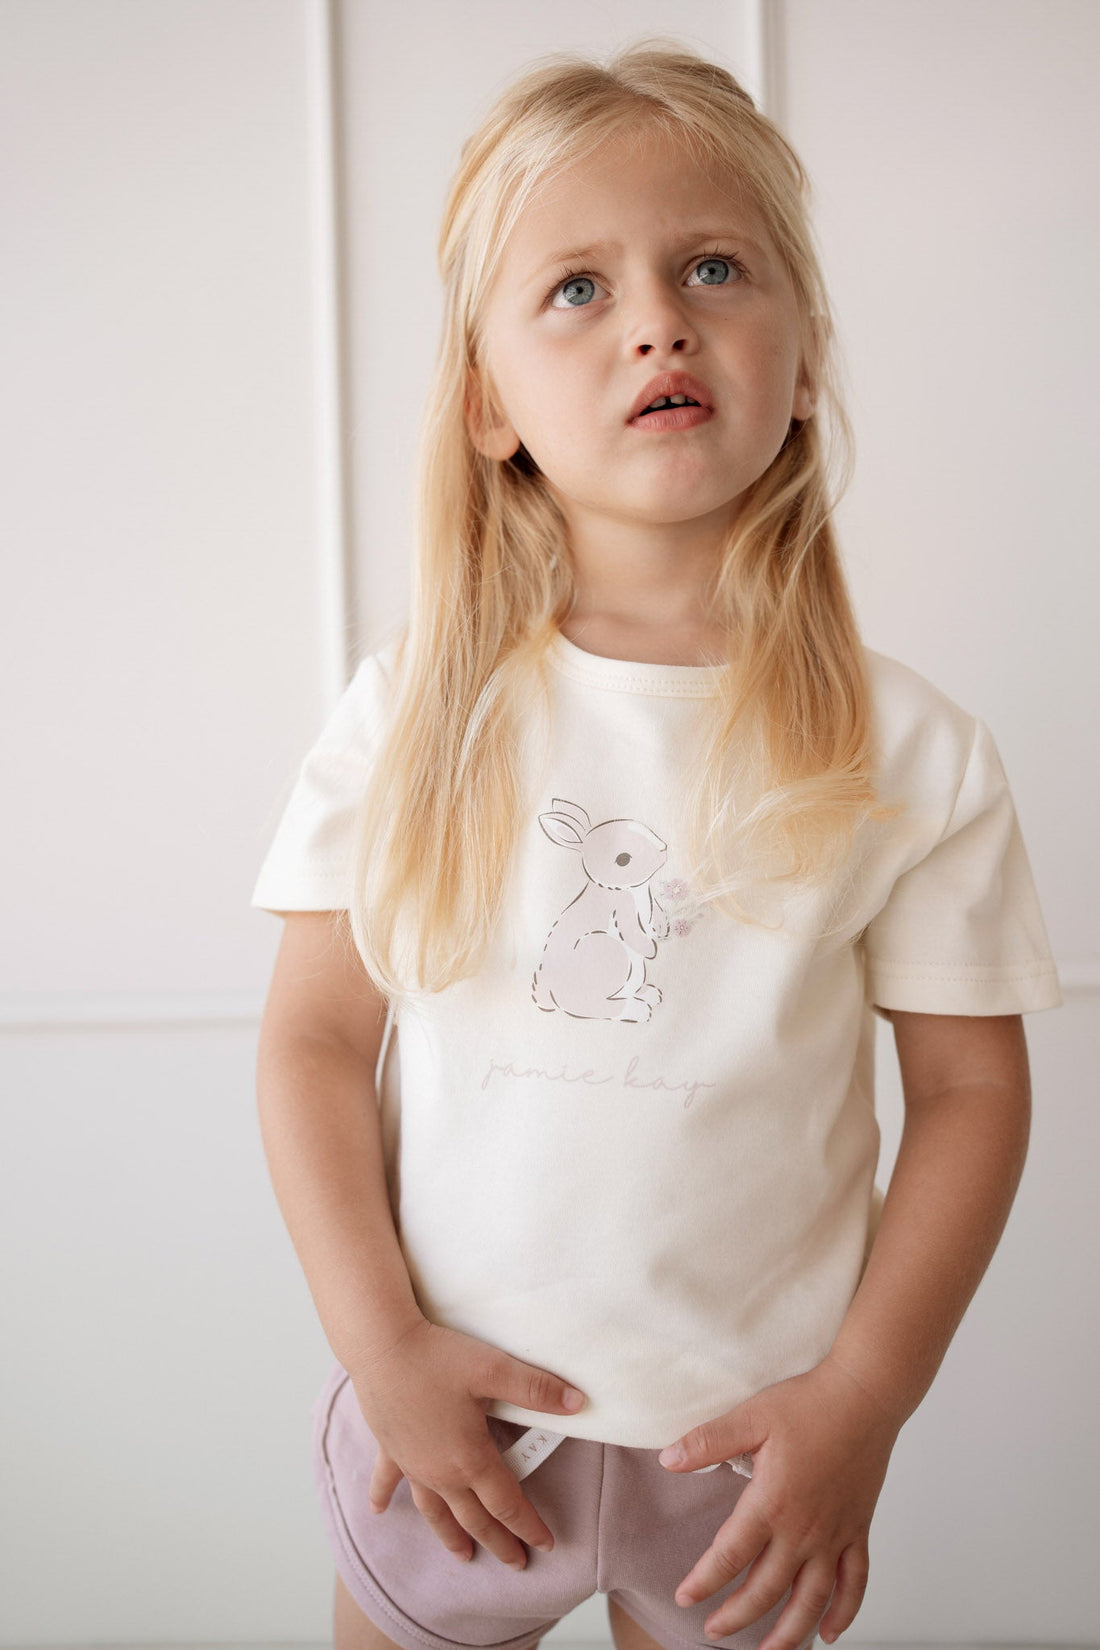 Pima Cotton Aude Oversized Tee - Parchment Childrens Top from Jamie Kay USA